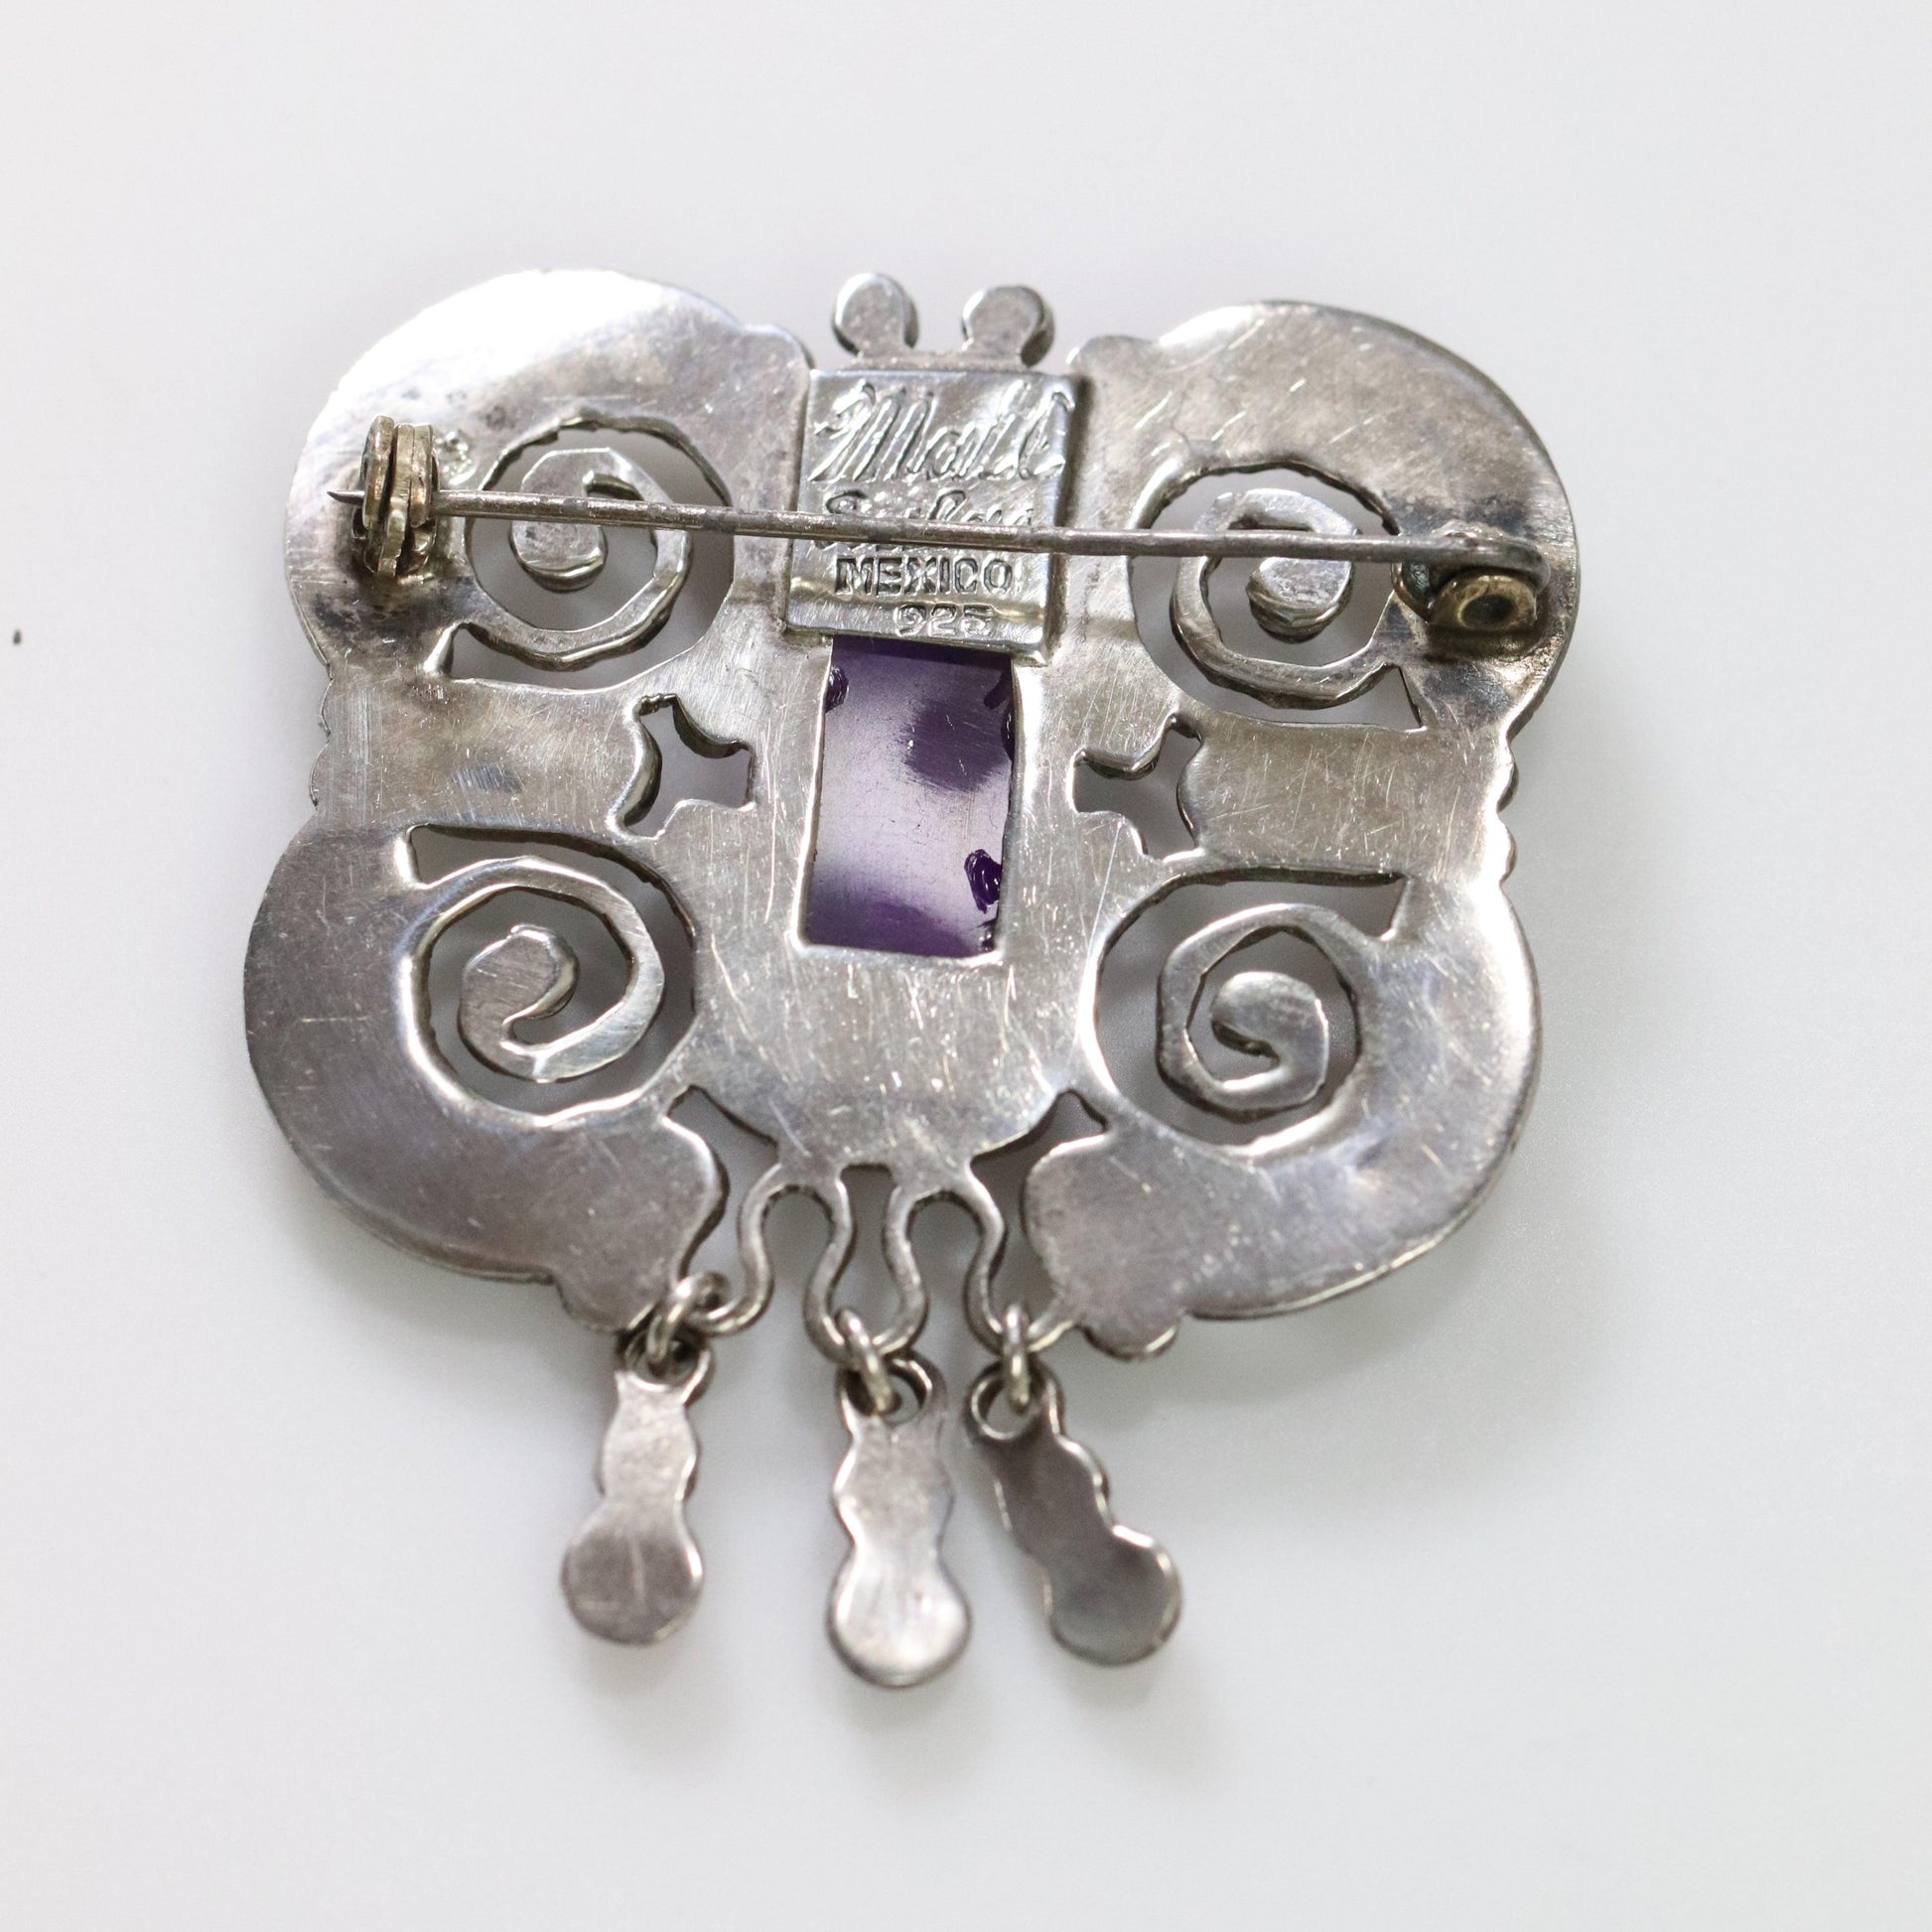 MATL Brooch | Ricardo Salas Amethyst, Coral, Tourquoise Pin | Vintage Sterling Silver Mexico - Carmel Fine Silver Jewelry